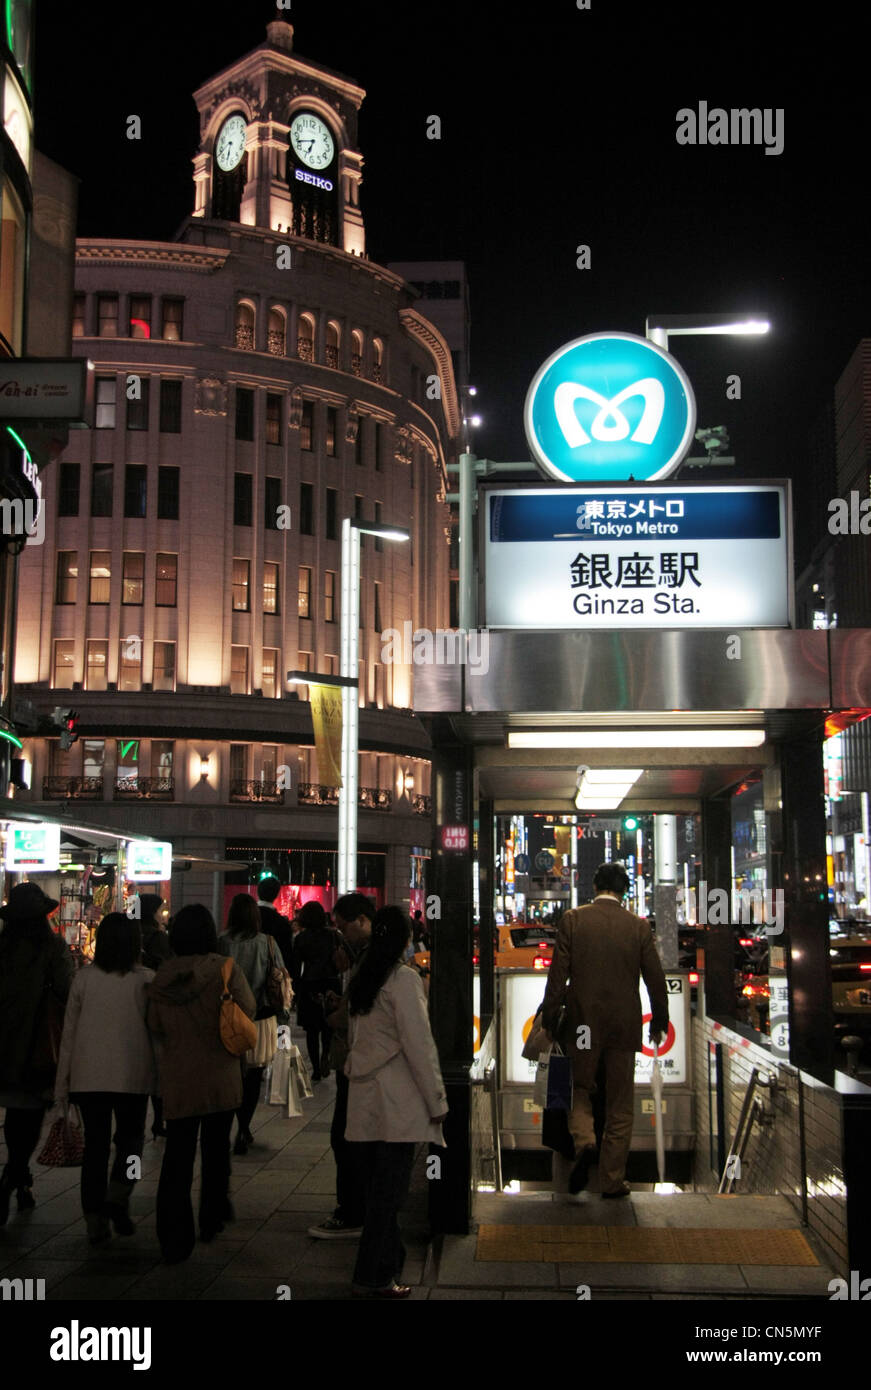 Entrance to Ginza underground metro station in Tokyo with the Wako building and clock tower in the background at night. Stock Photo